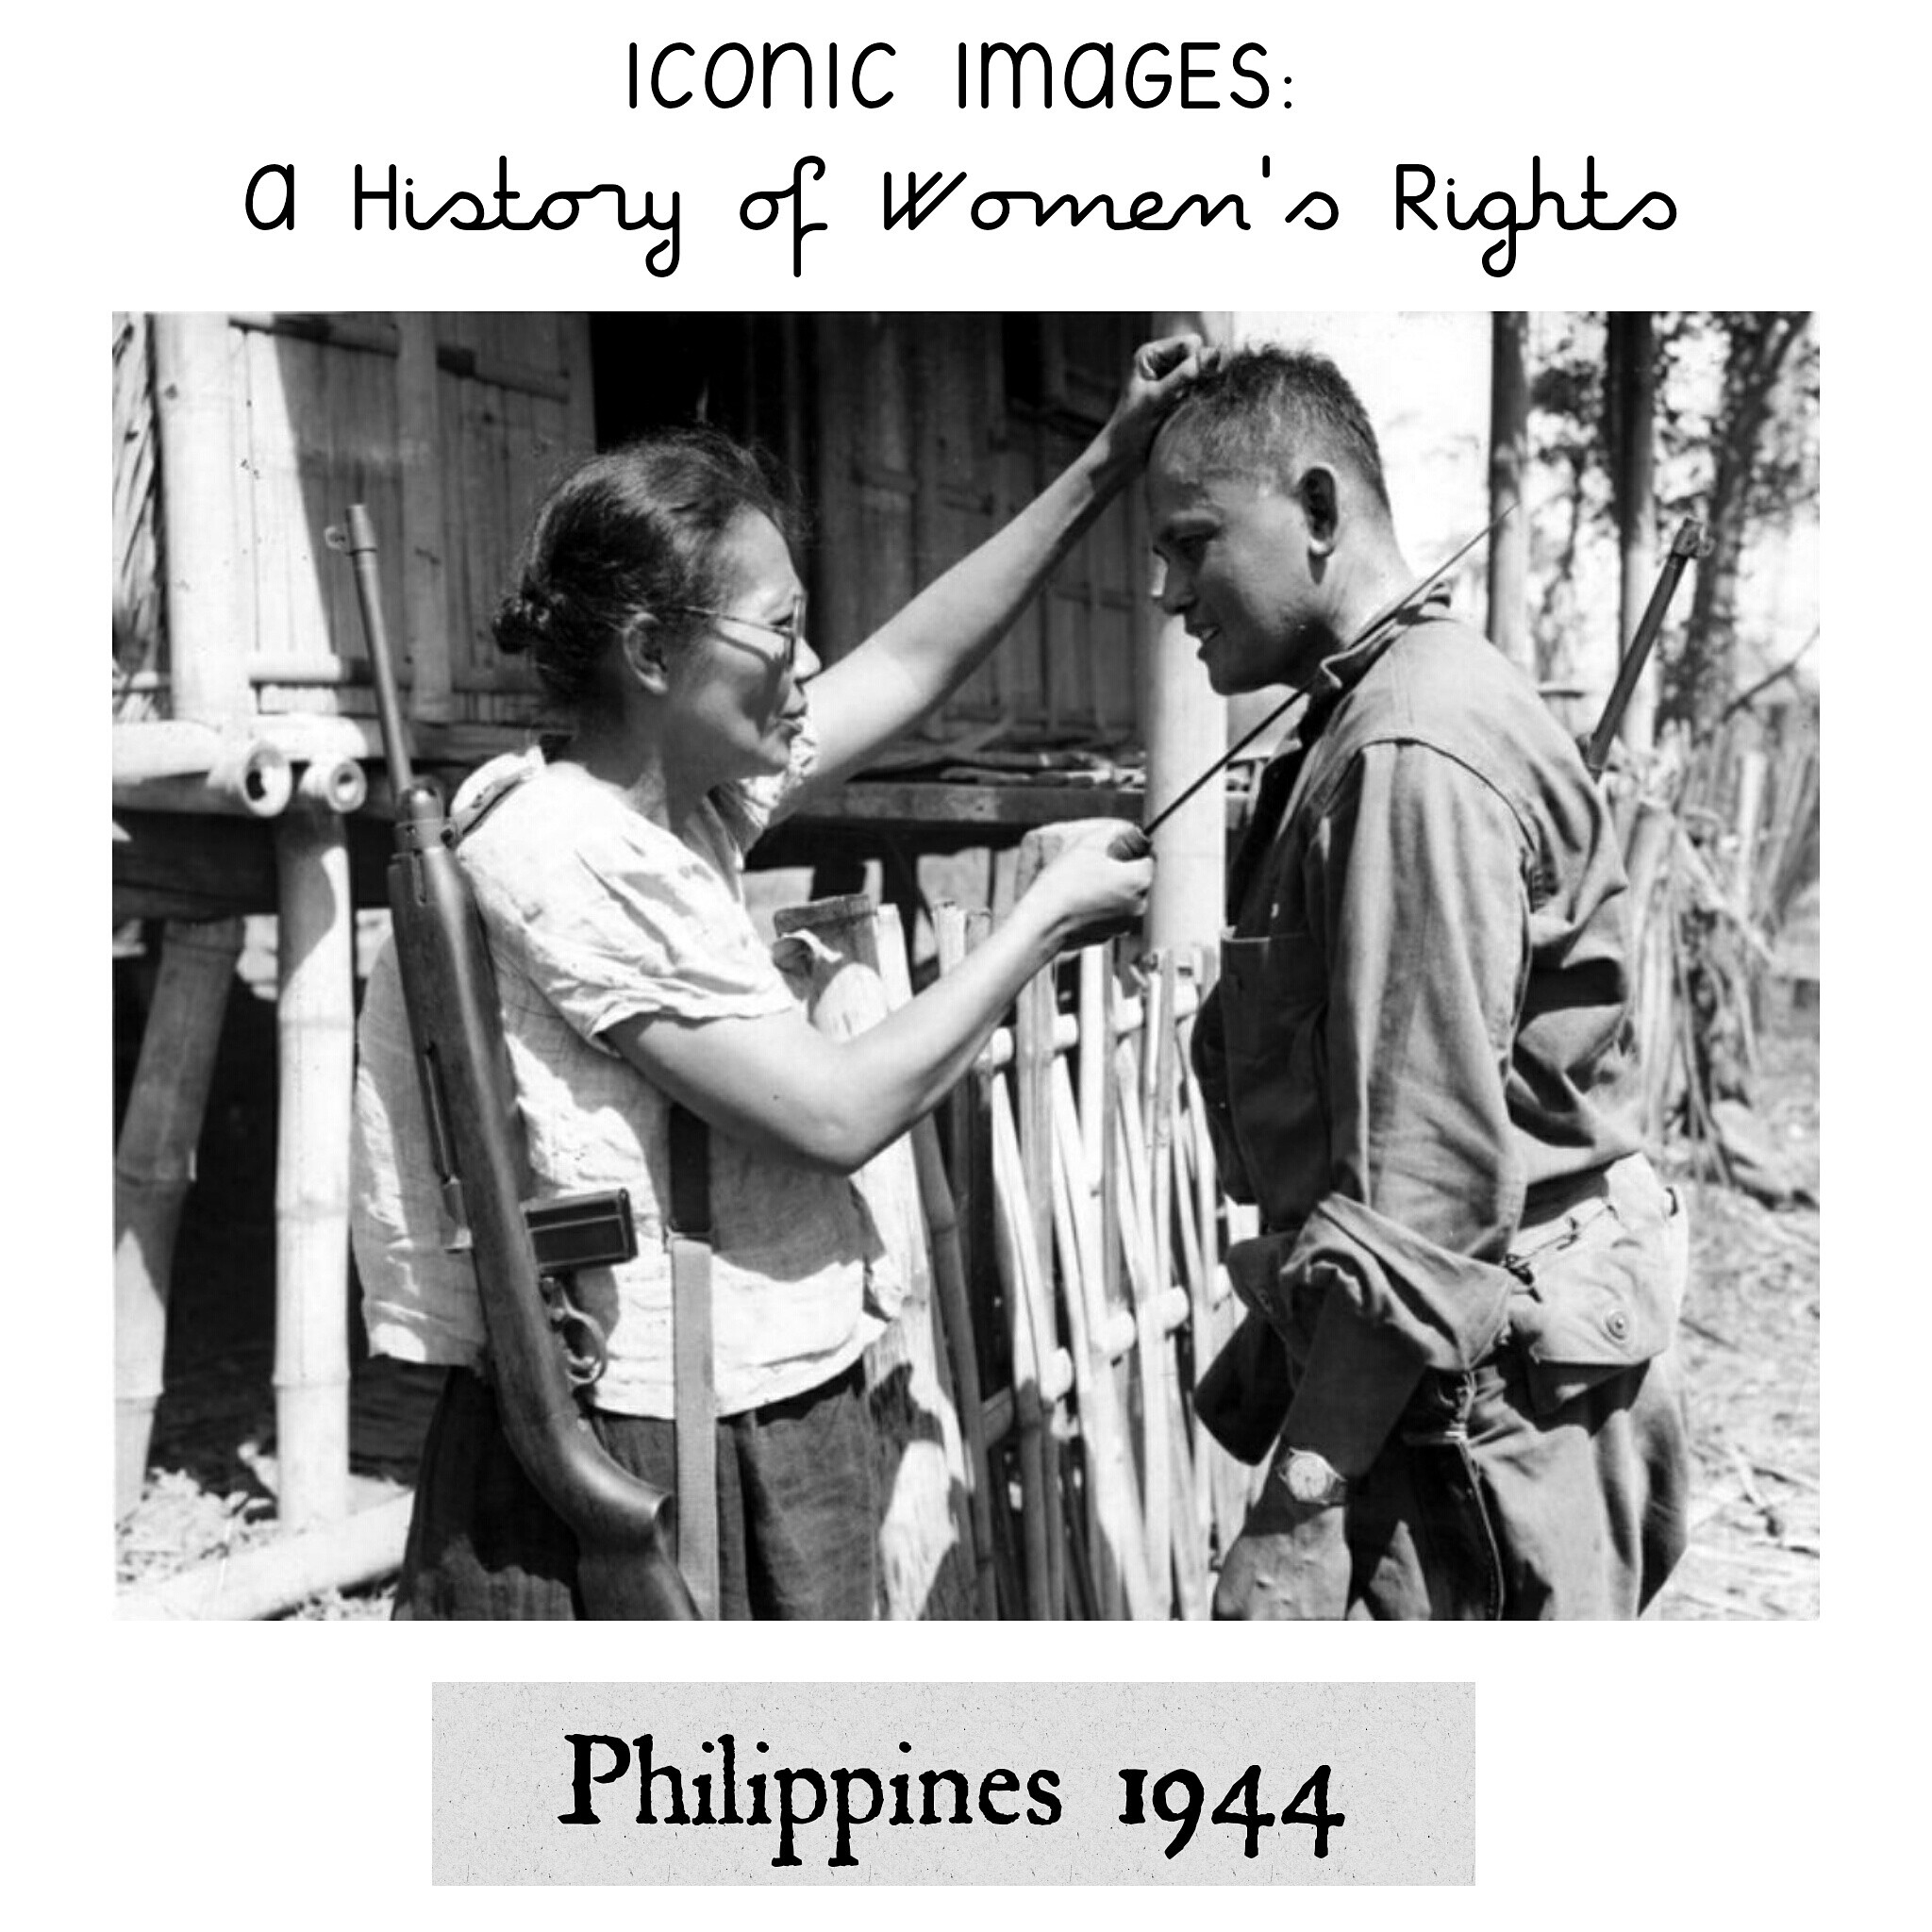 The image shows Captain Nieves Fernandez, a guerilla woman from the Philippines, demonstrating to a US soldier how she used a long knife to kill Japanese soldier.